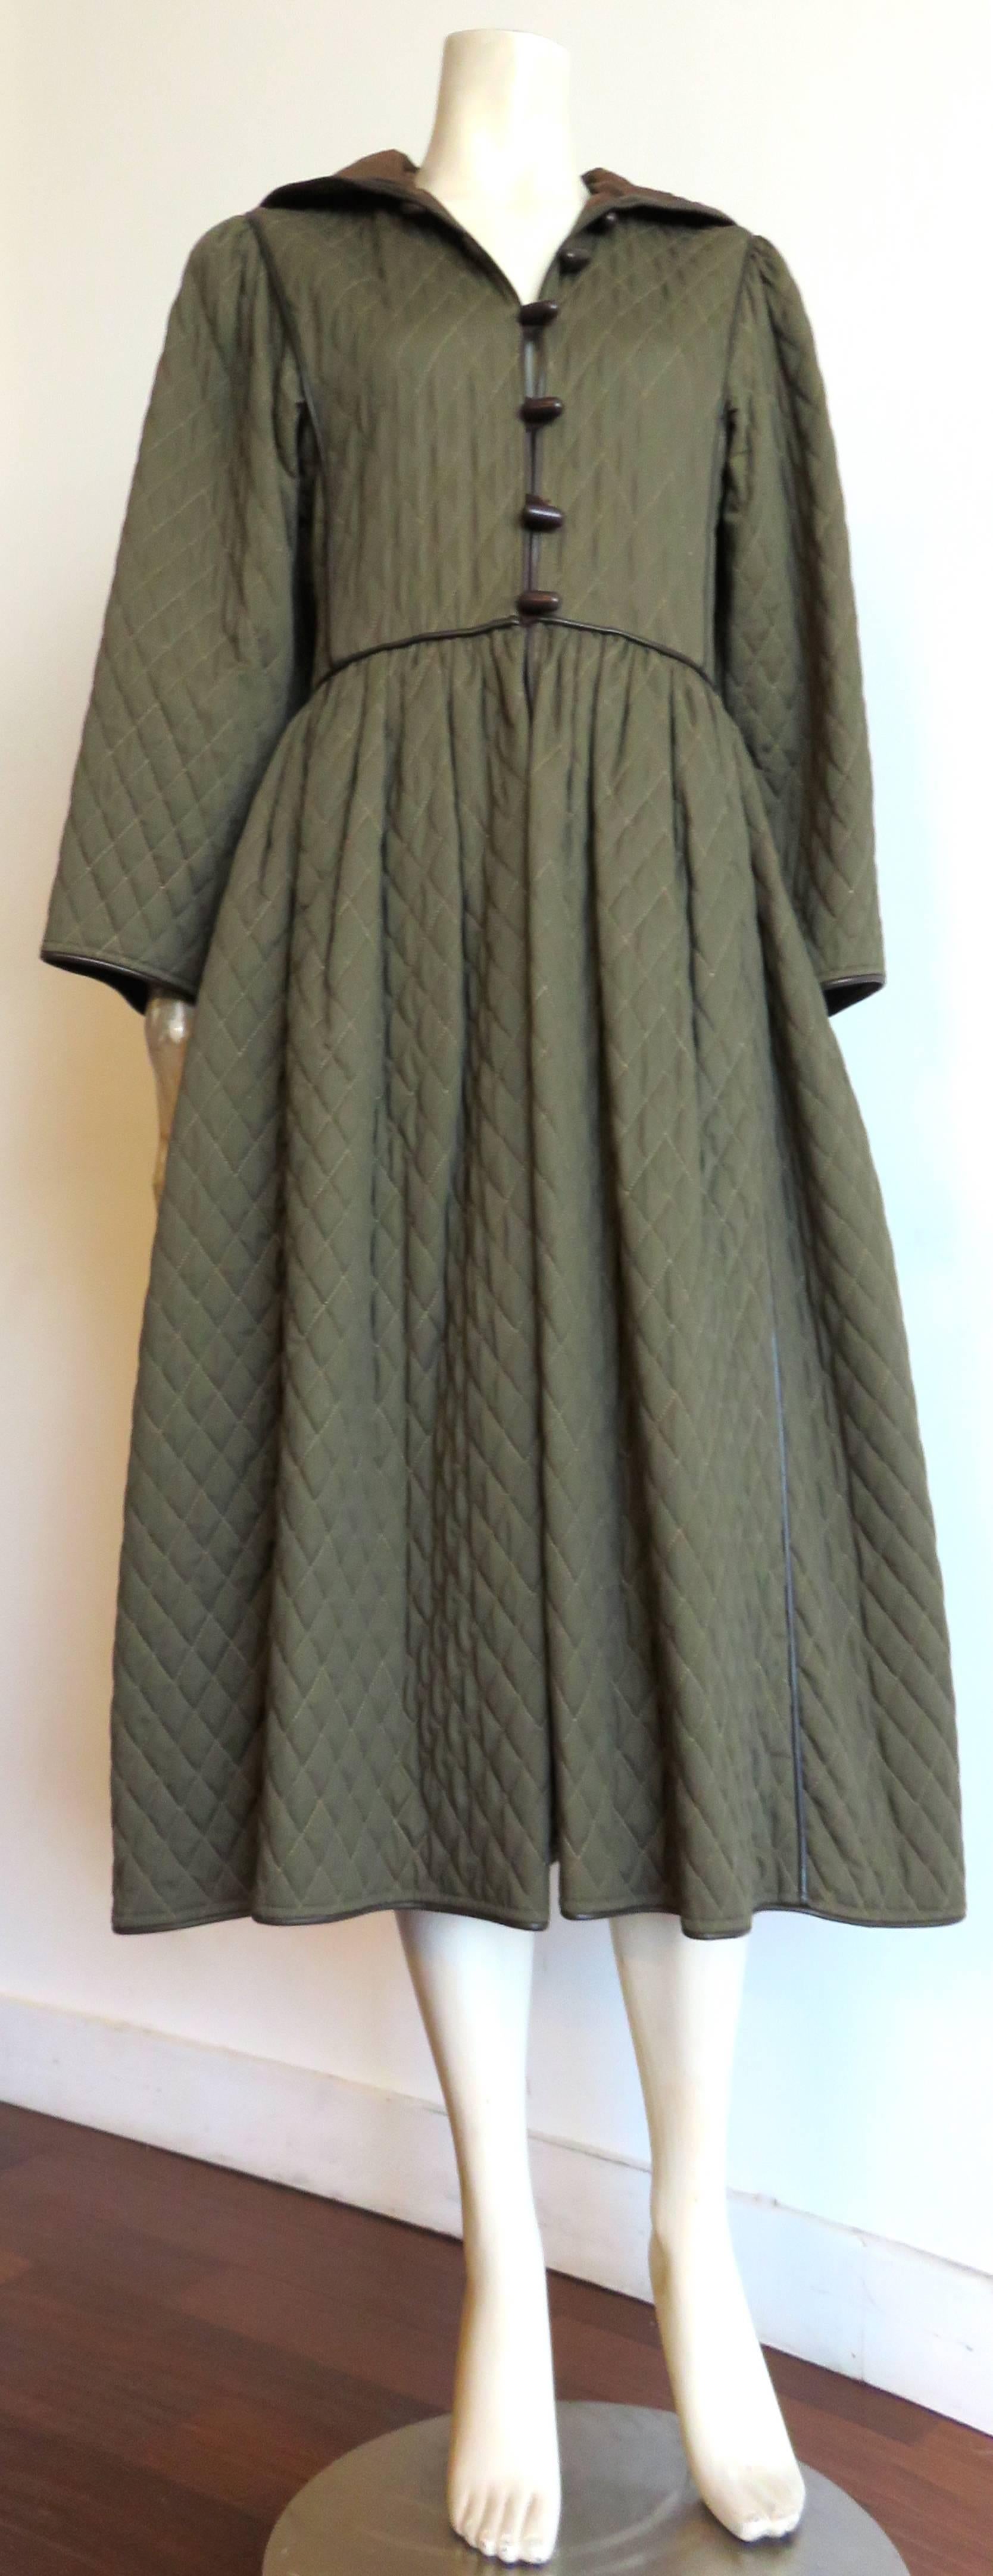 Great condition, 1970's SAINT LAURENT Iconic, diamond-quilted coat dress in olive green with dark brown leather piping seaming detailing throughout.

Lightly padded.

Fitted waistline with a flared, skirt silhouette.

Dark brown, toggle front,